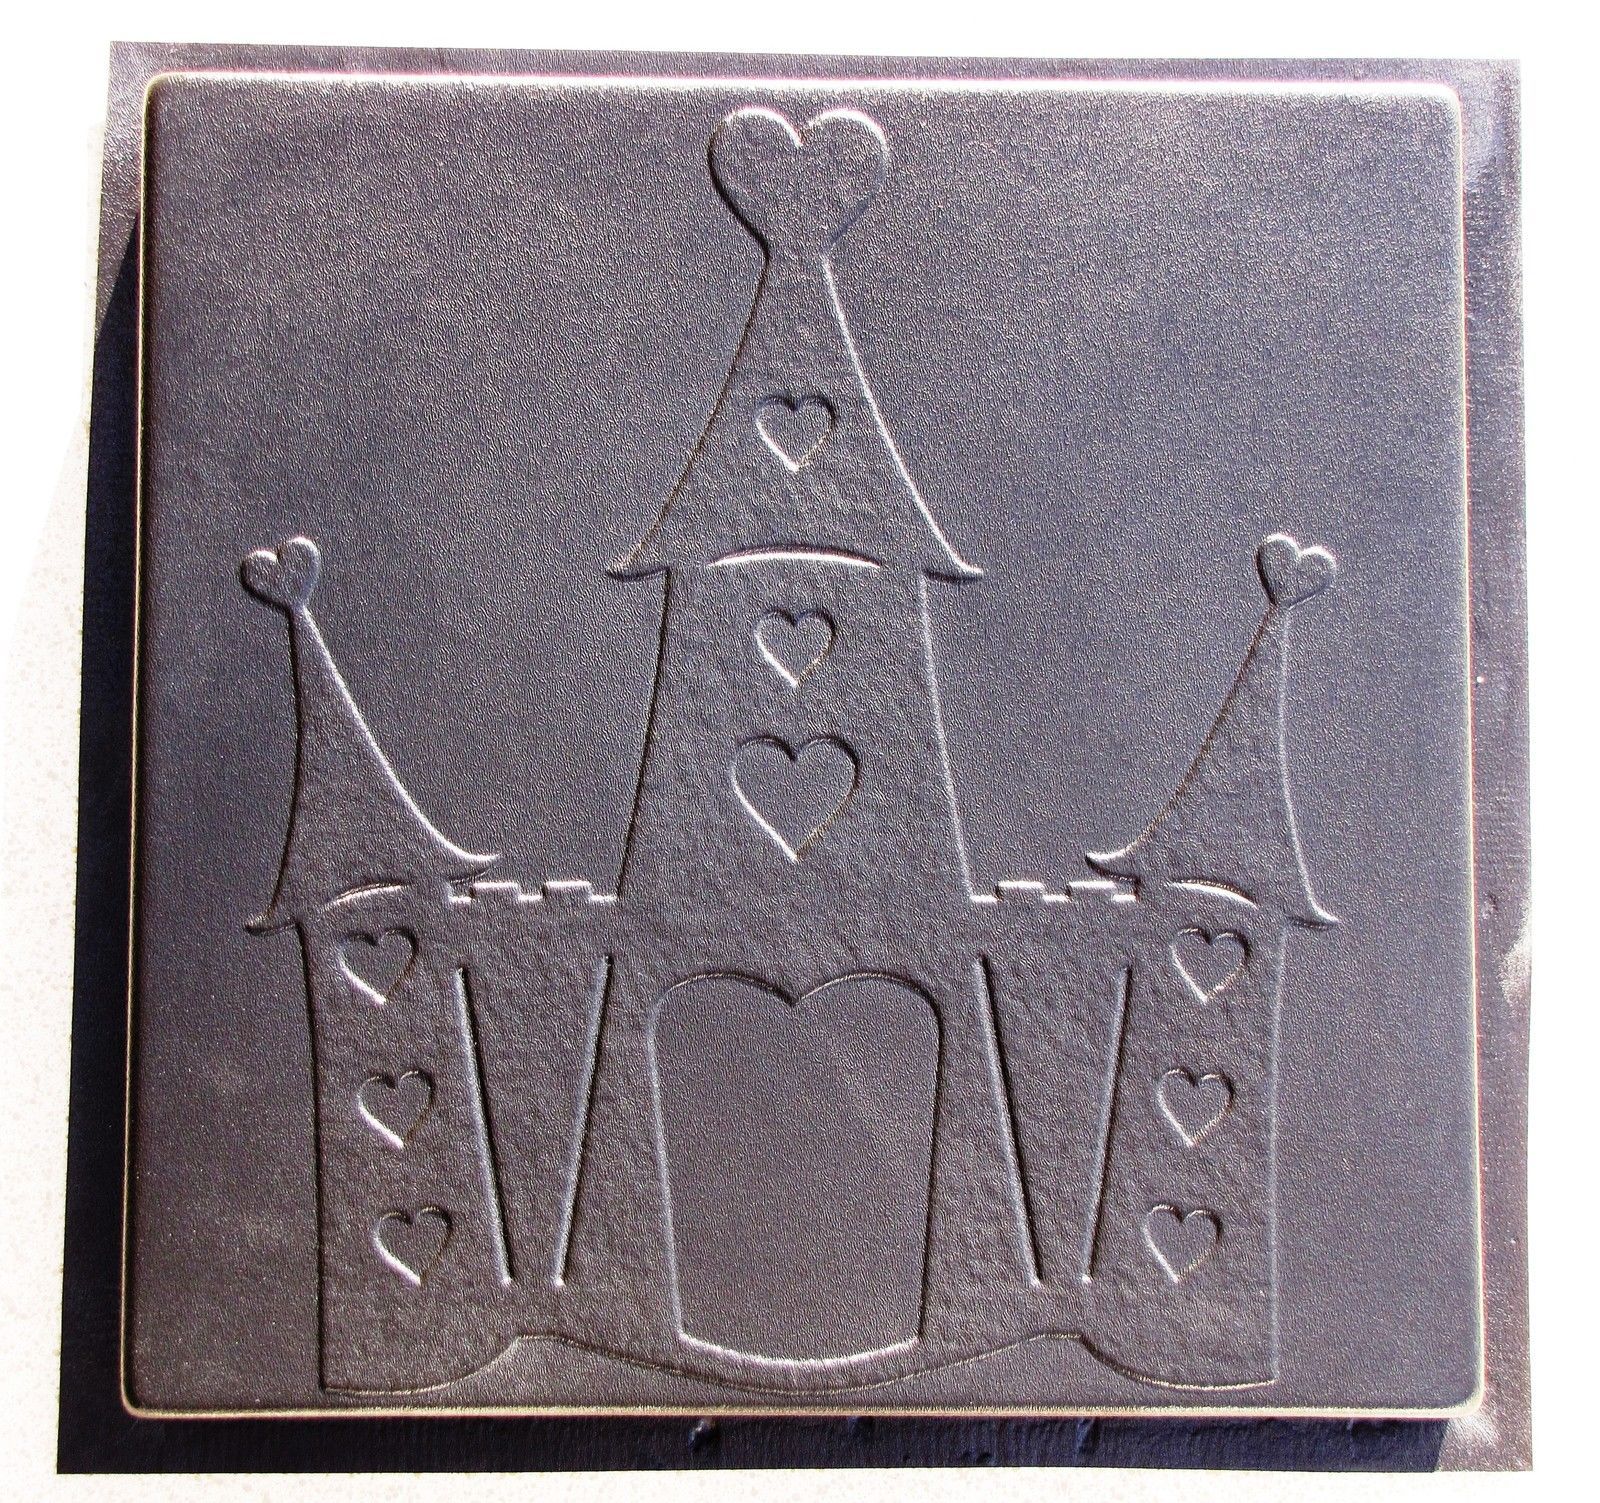 Whimsical Castle Stepping Stone Mold #2 Concrete Makes 18x18 Stones For $2 Each - $59.99